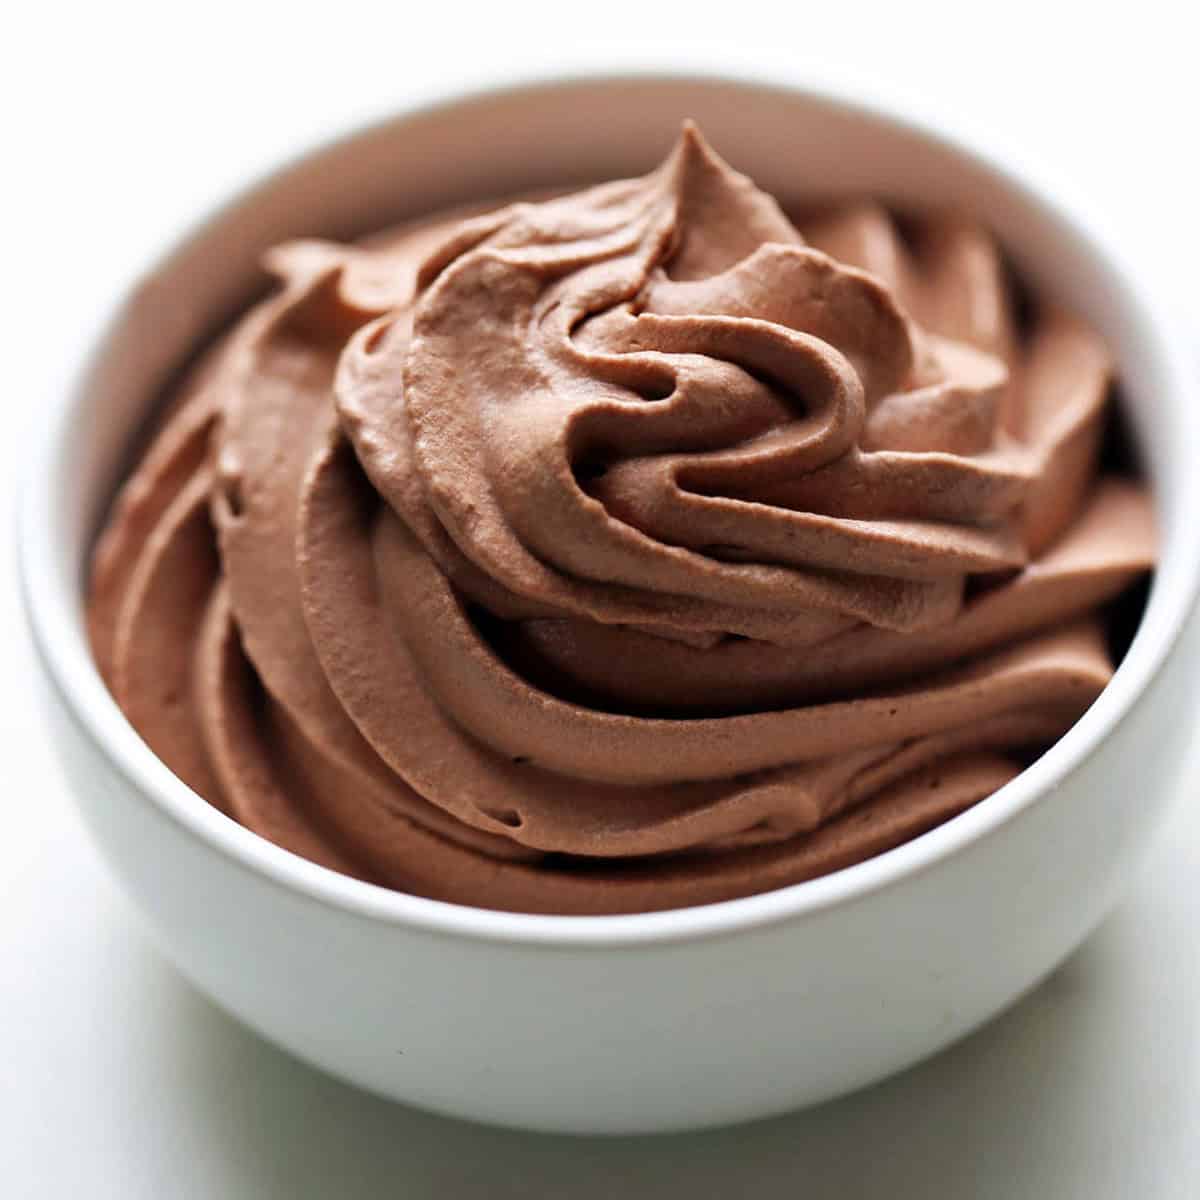 Chocolate whipped cream is served in a bowl.